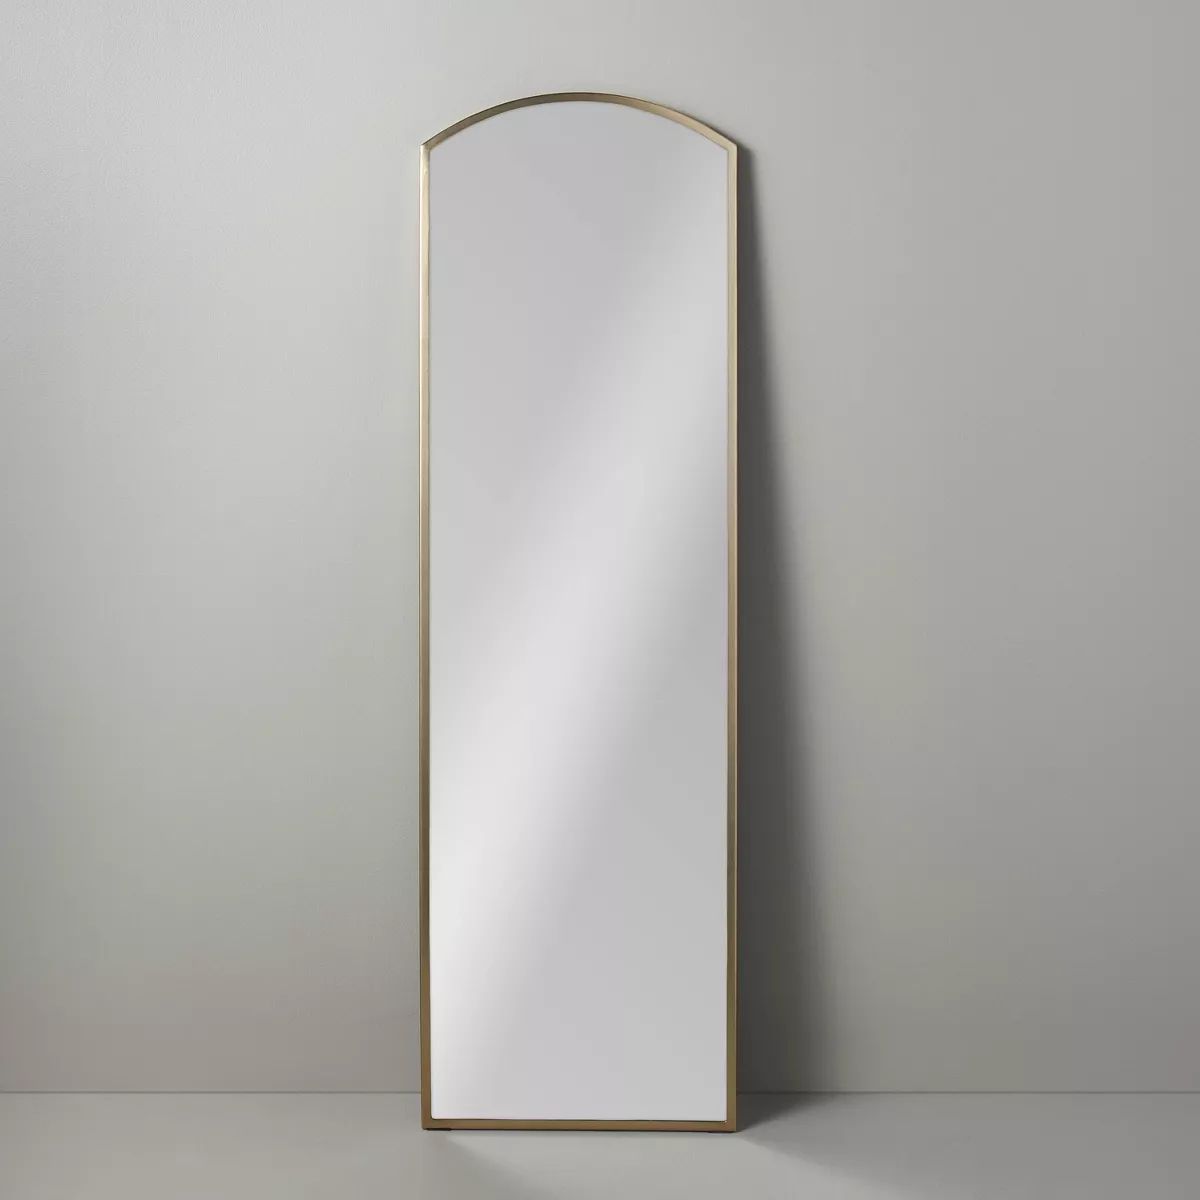 Arched 19"x64" Rectangular Metal Leaning Floor Mirror Brass - Hearth & Hand™ with Magnolia | Target